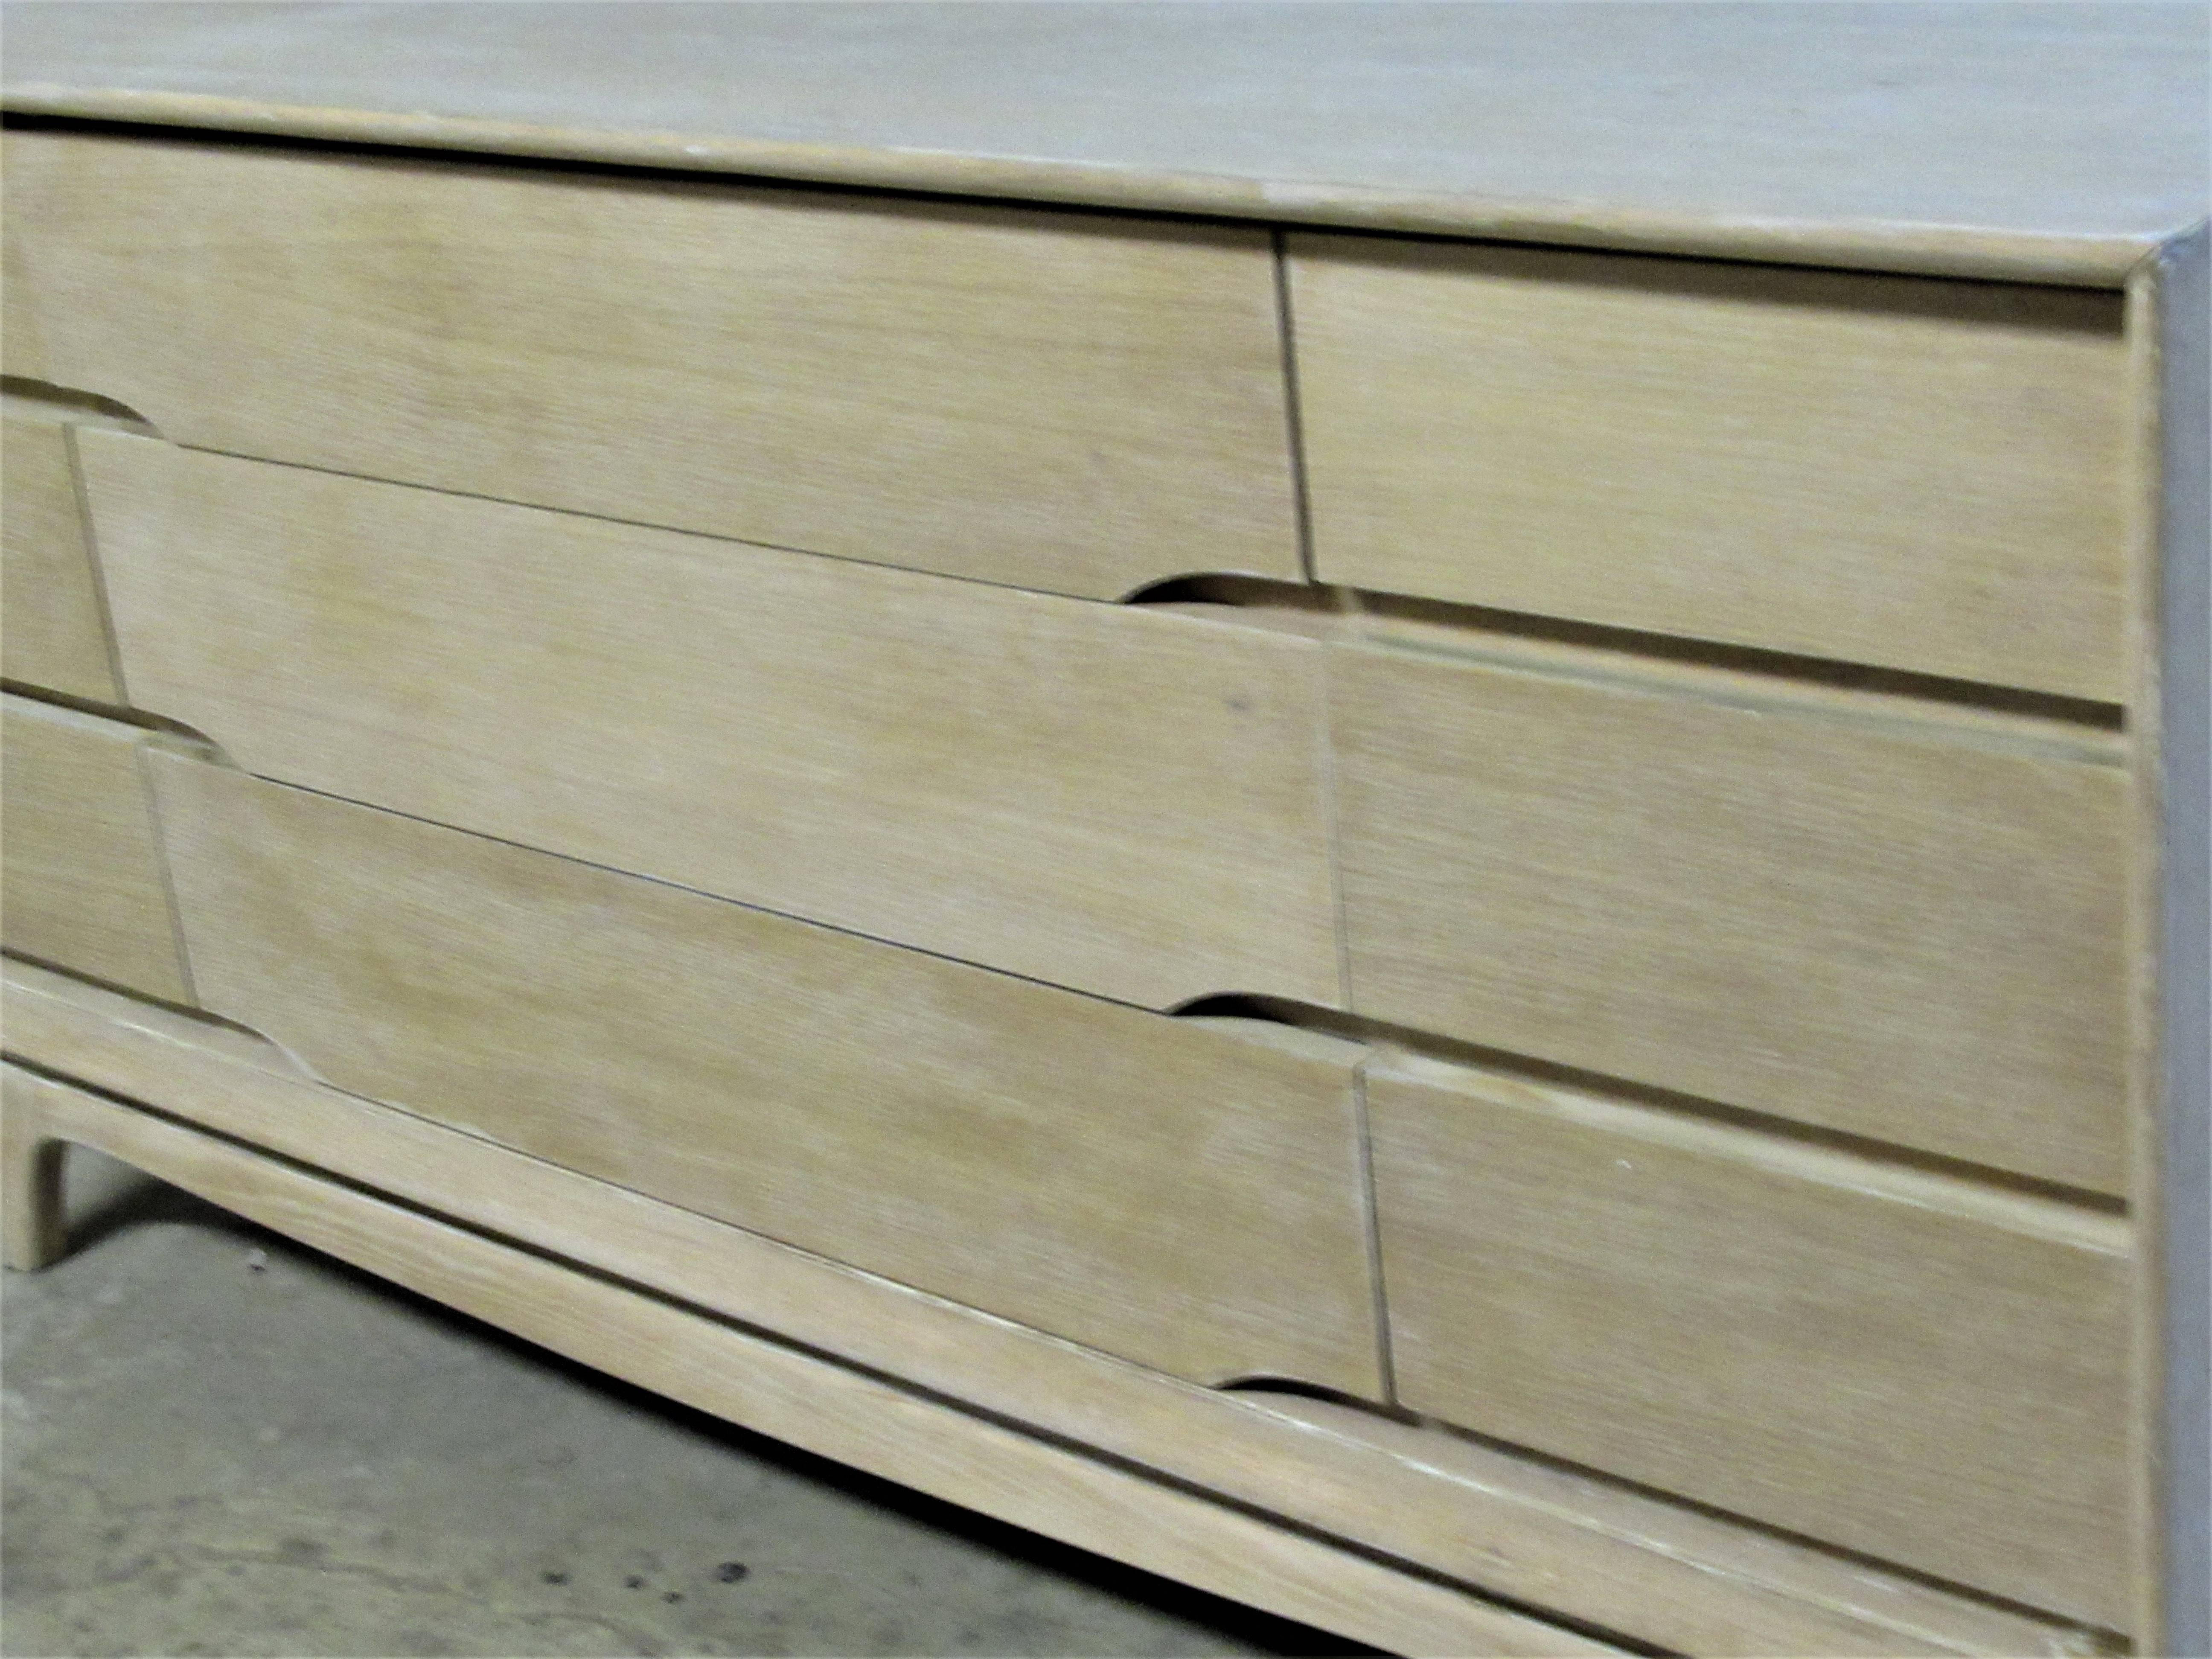 A Mid-Century Modernist nine-drawer credenza dresser (three long central drawers - six short side drawers) with a very sleek sculptural form. The wood has been stripped, bleached and cerused to a very pale parchment color. See all pictures.